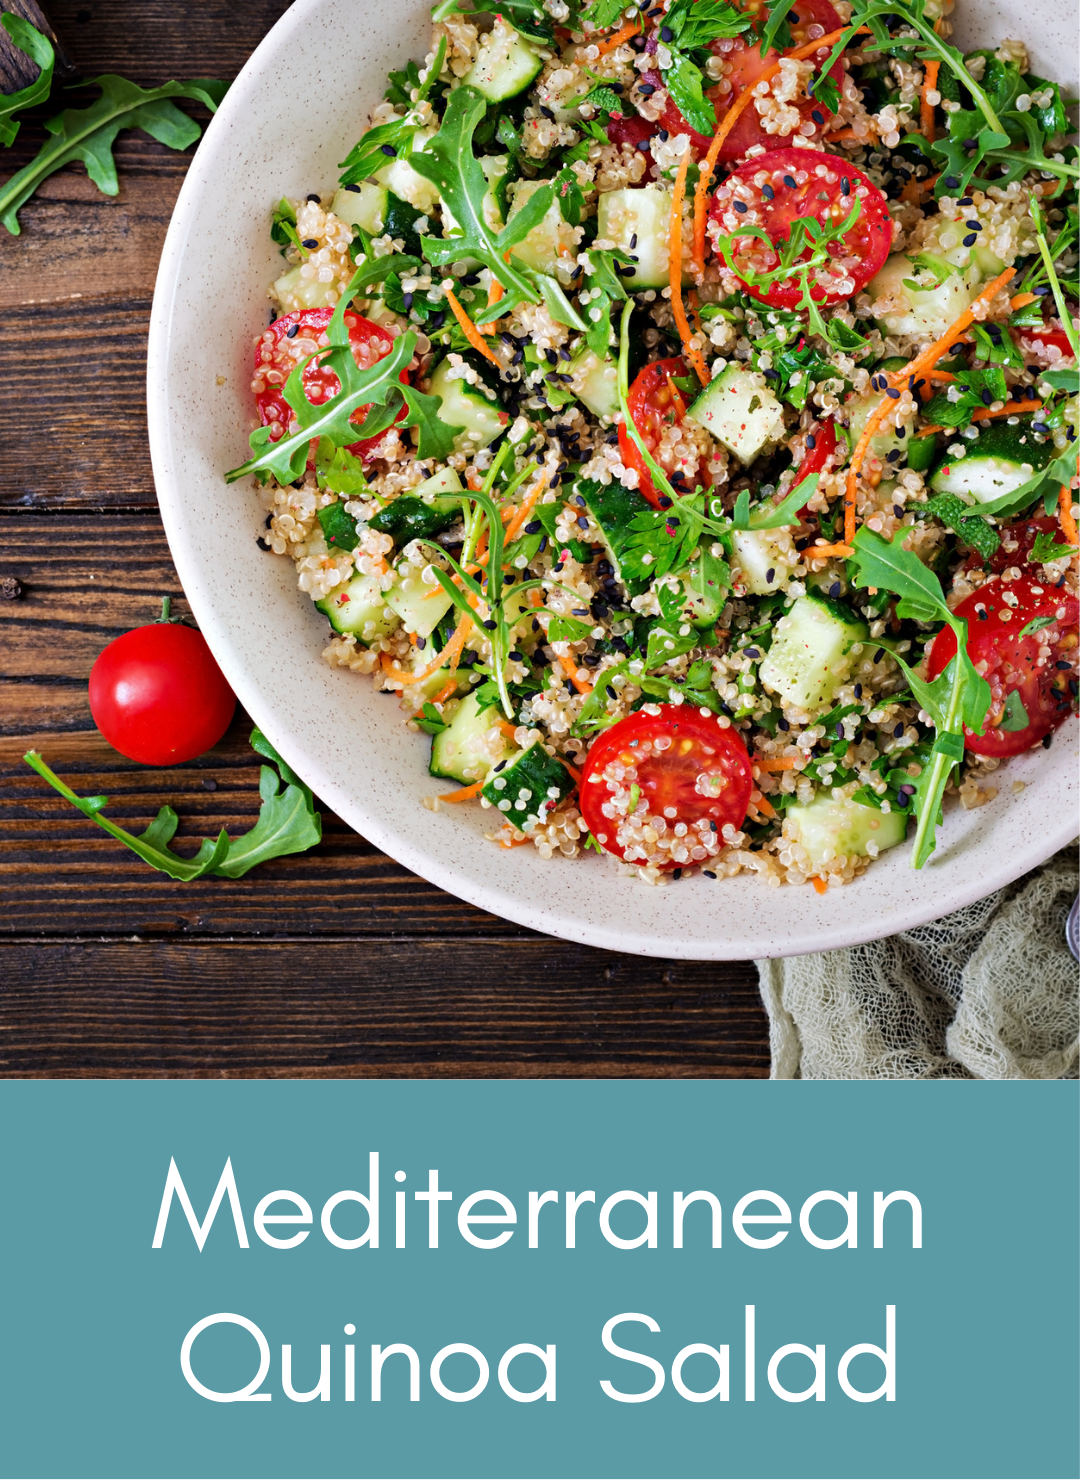 Mediterranean Plant-based whole food quinoa salad Picture with link to recipe